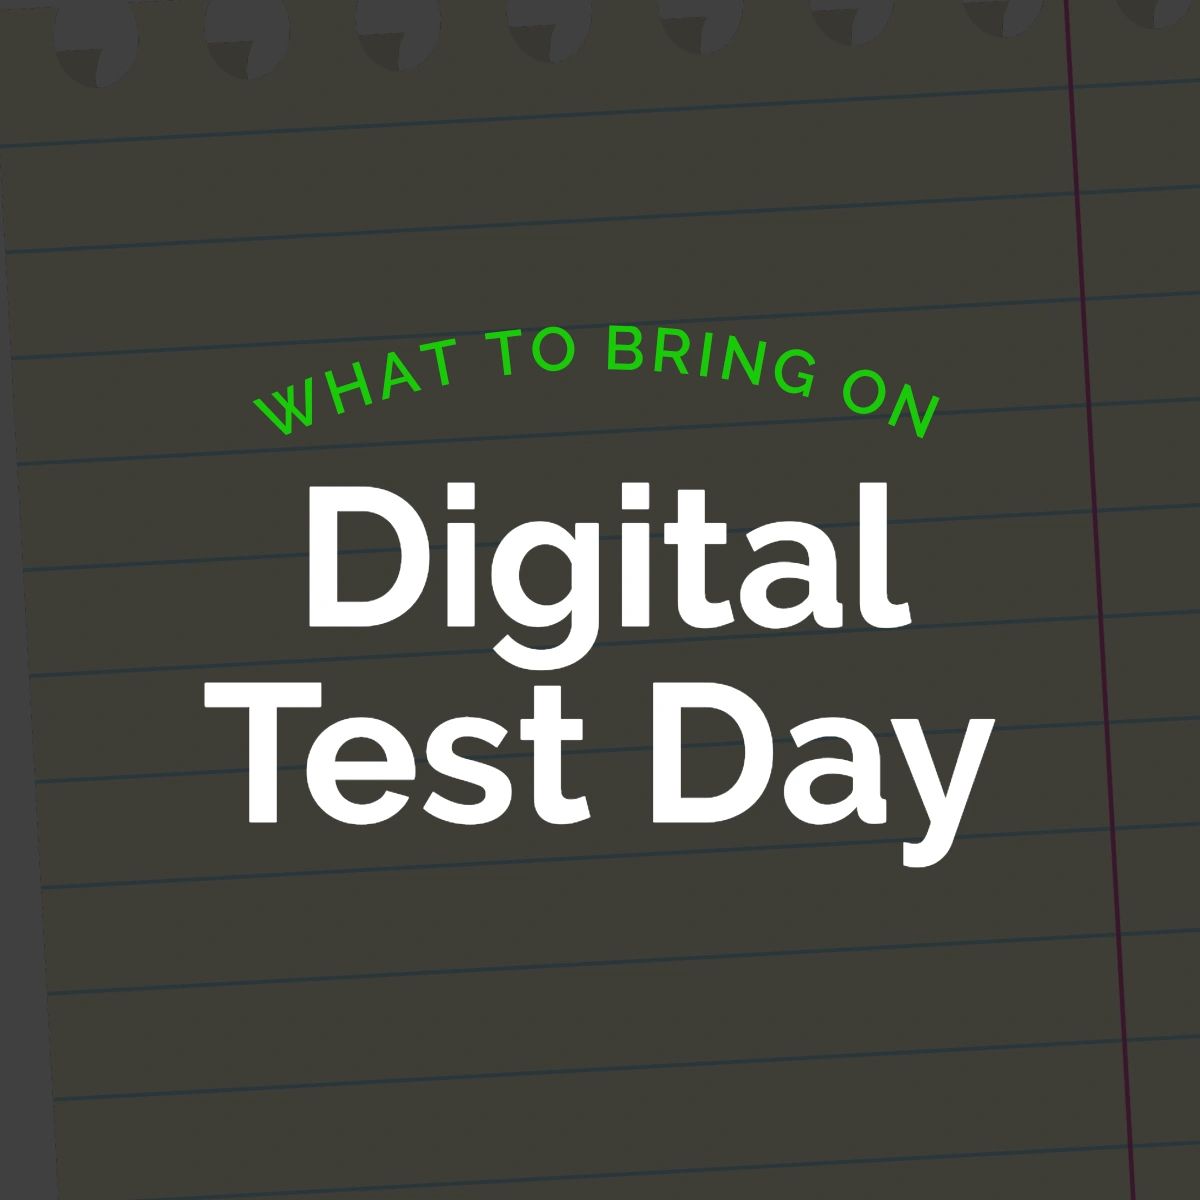 Do you know what to bring on Digital Test Day?

Get in touch: sattutors.net.

Find us on LinkedIn: linkedin.com/services/page/….

#NorthsideTutoring #SATTutoring #ACTTutoring #tutoring #Atlanta #Buckhead #Georgia